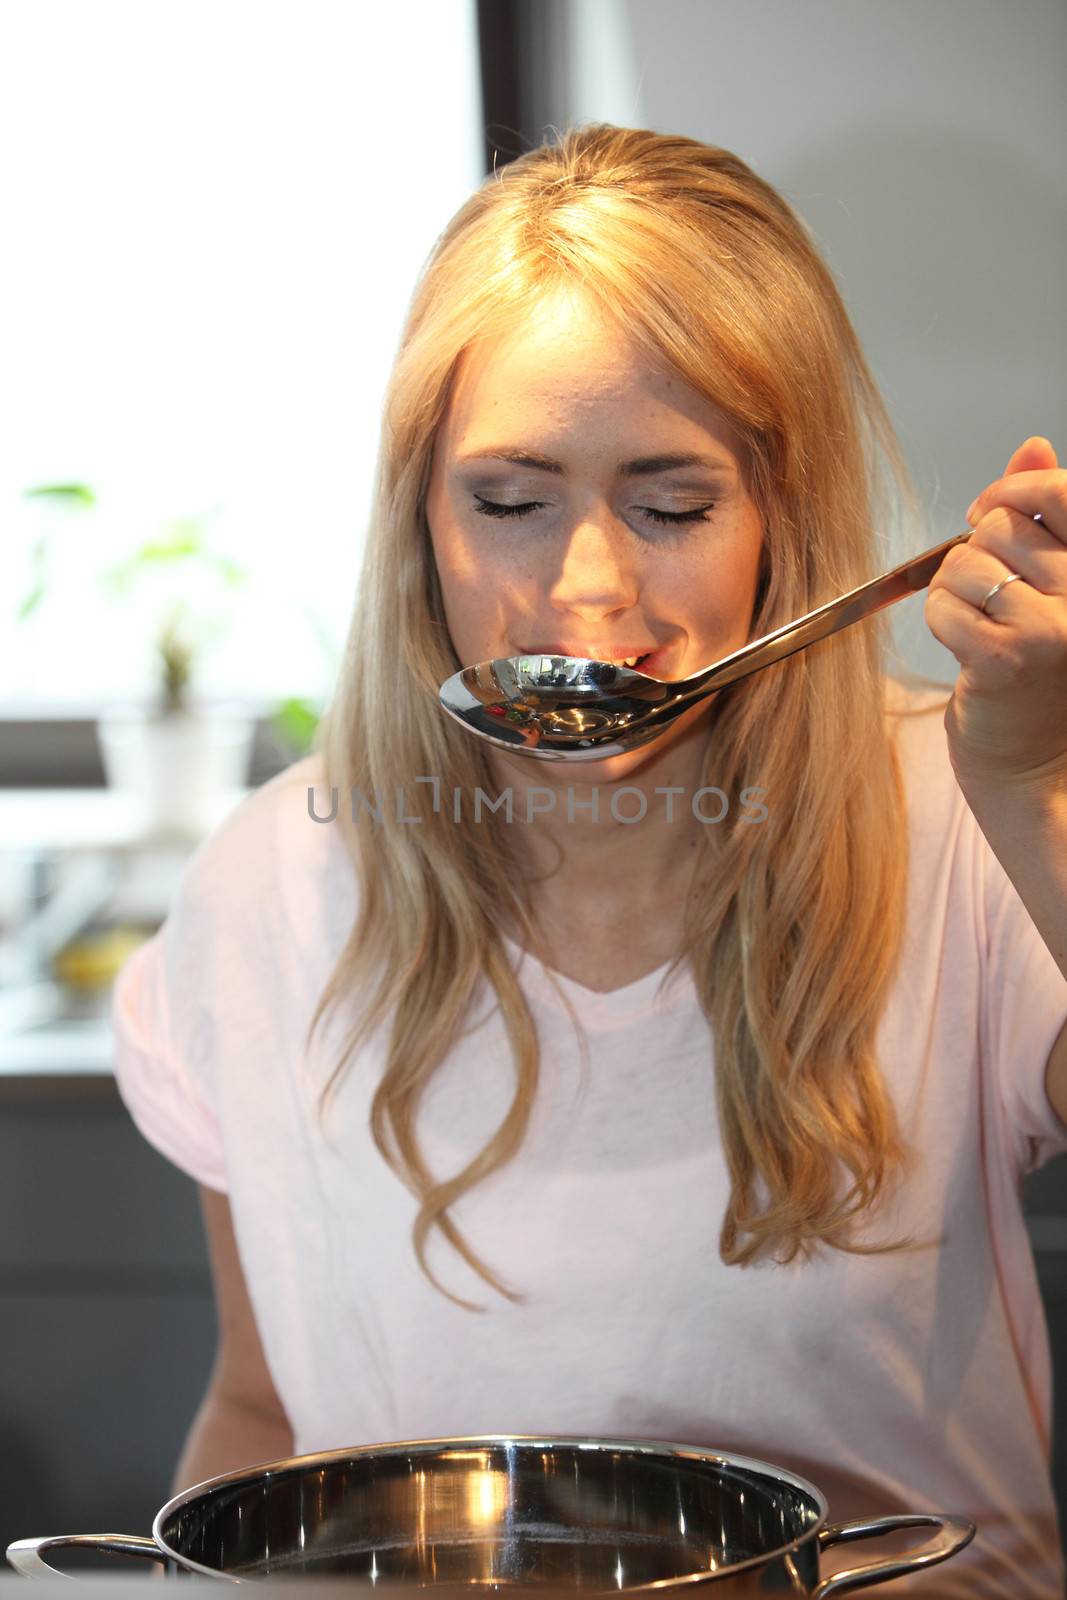 Woman tasting her cooking from the pot using a big stainless steel ladle and closing her eyes in appreciation